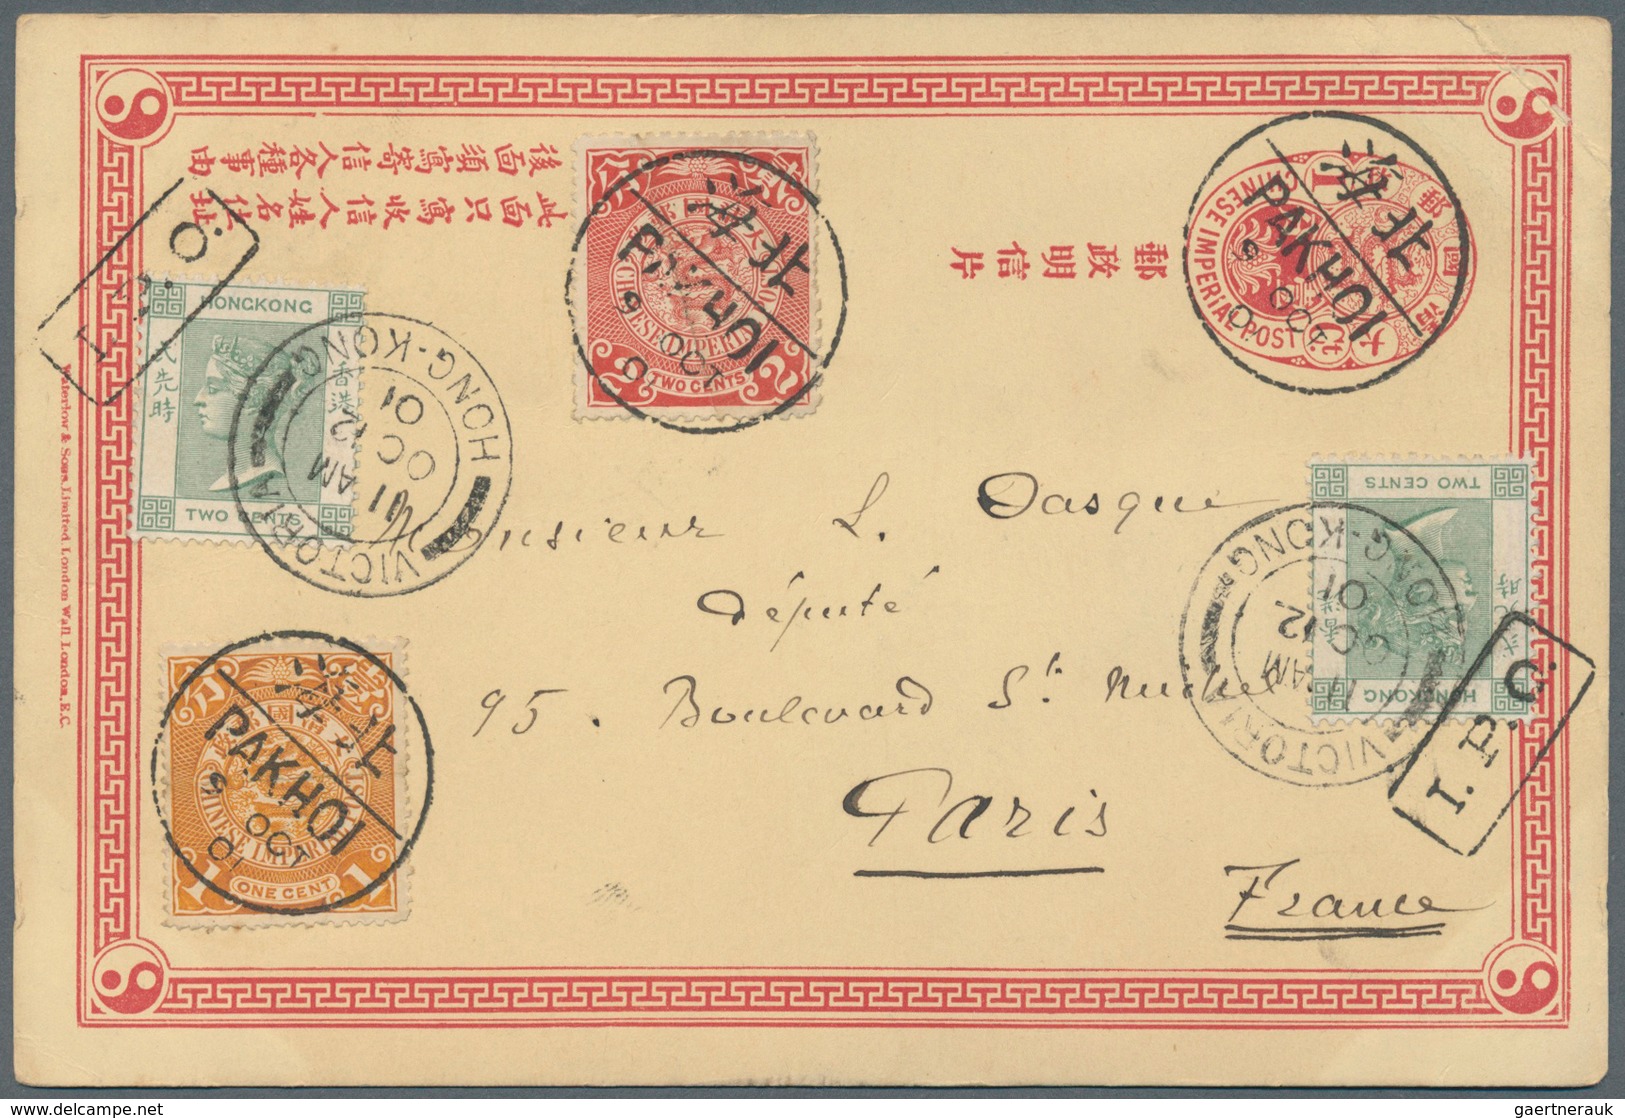 China - Ganzsachen: 1901, Chinese Imperial Post Postal Stationery Card 1c Red Uprated With 1c Ochre - Cartes Postales